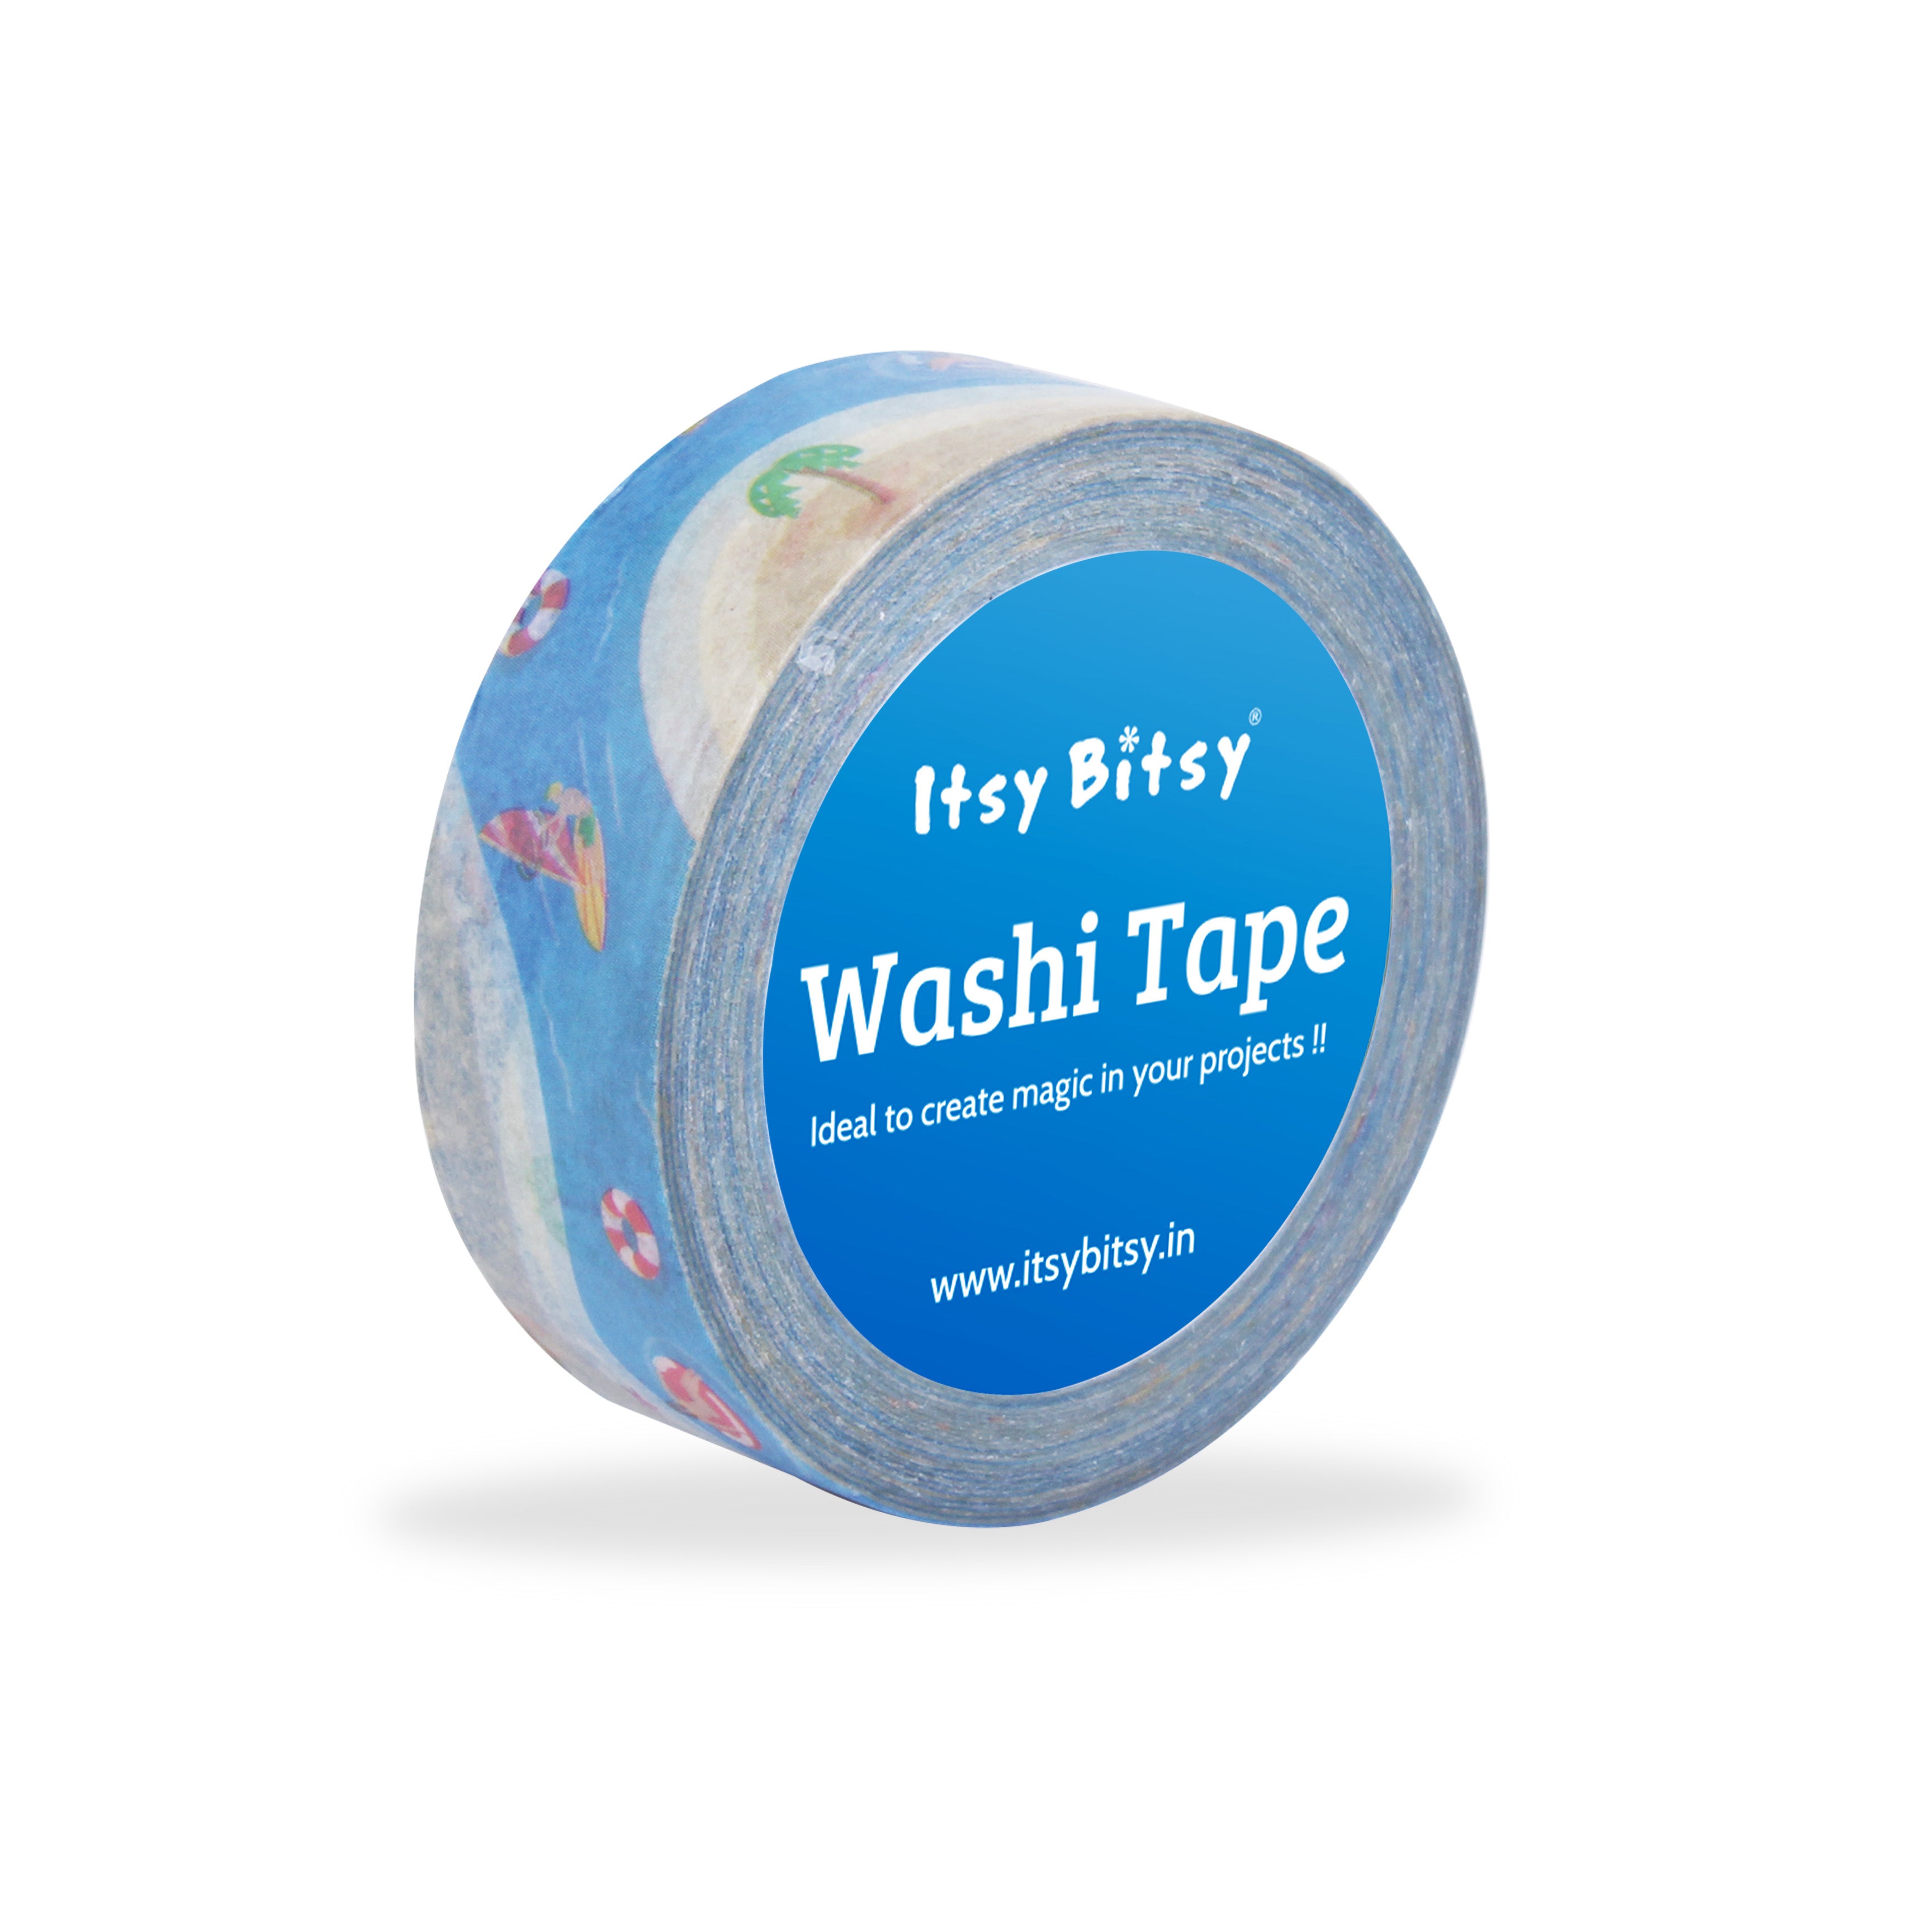 Washi Tape River View 15mmx10Mtr 1Roll